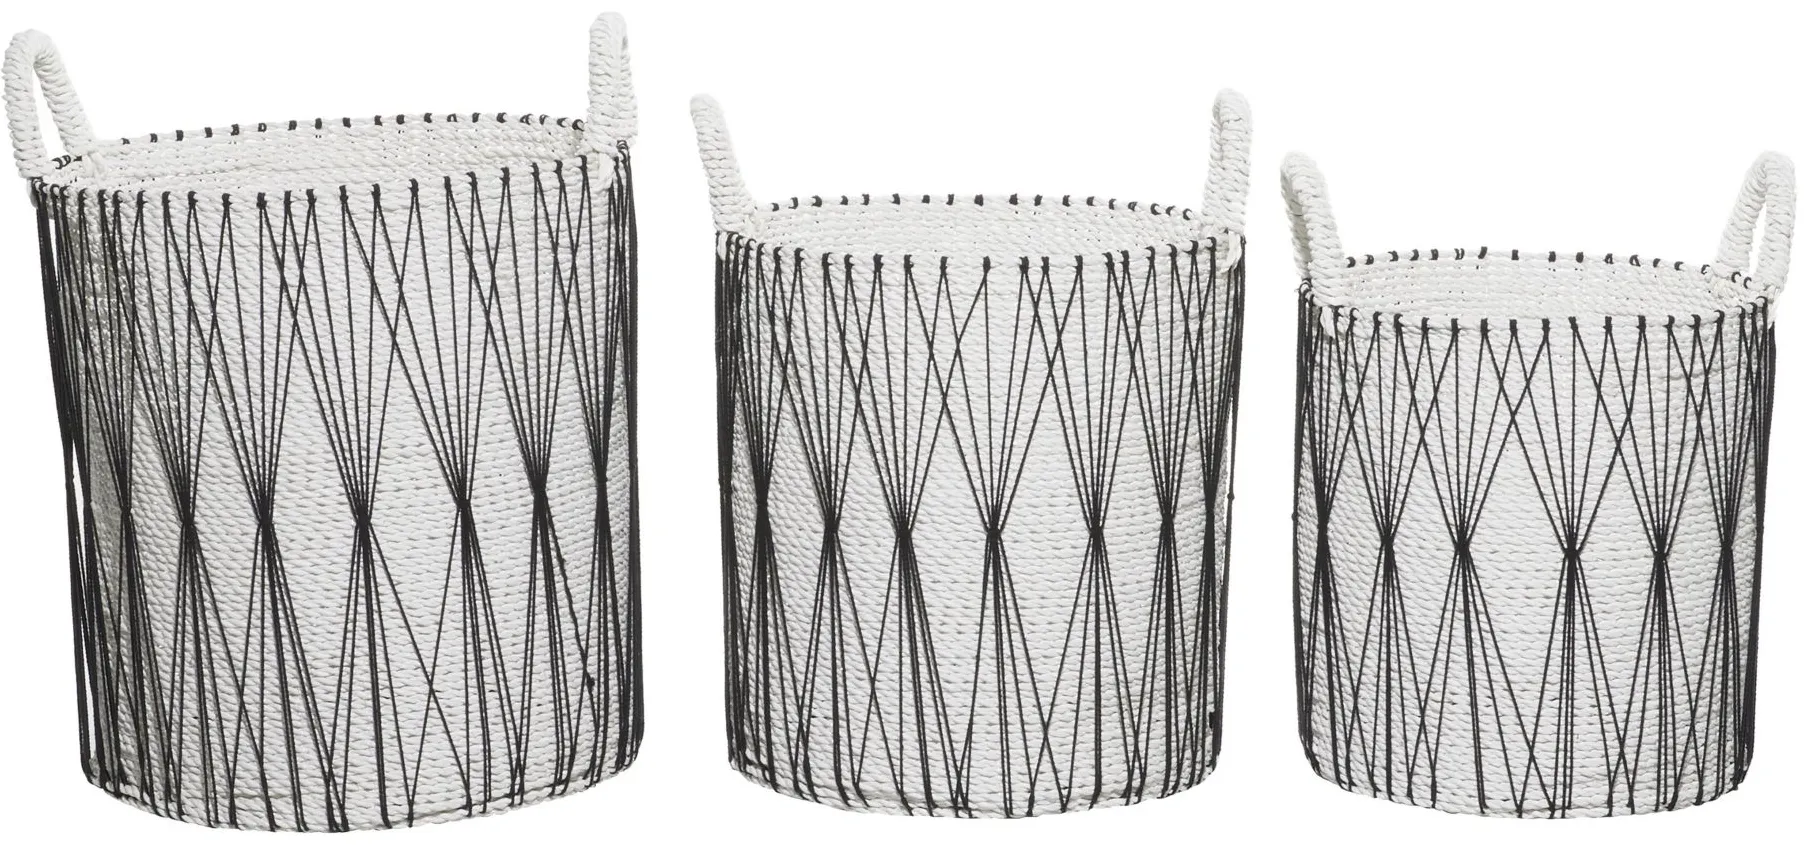 Ivy Collection Astolfo Storage Baskets Set of 3 in White by UMA Enterprises